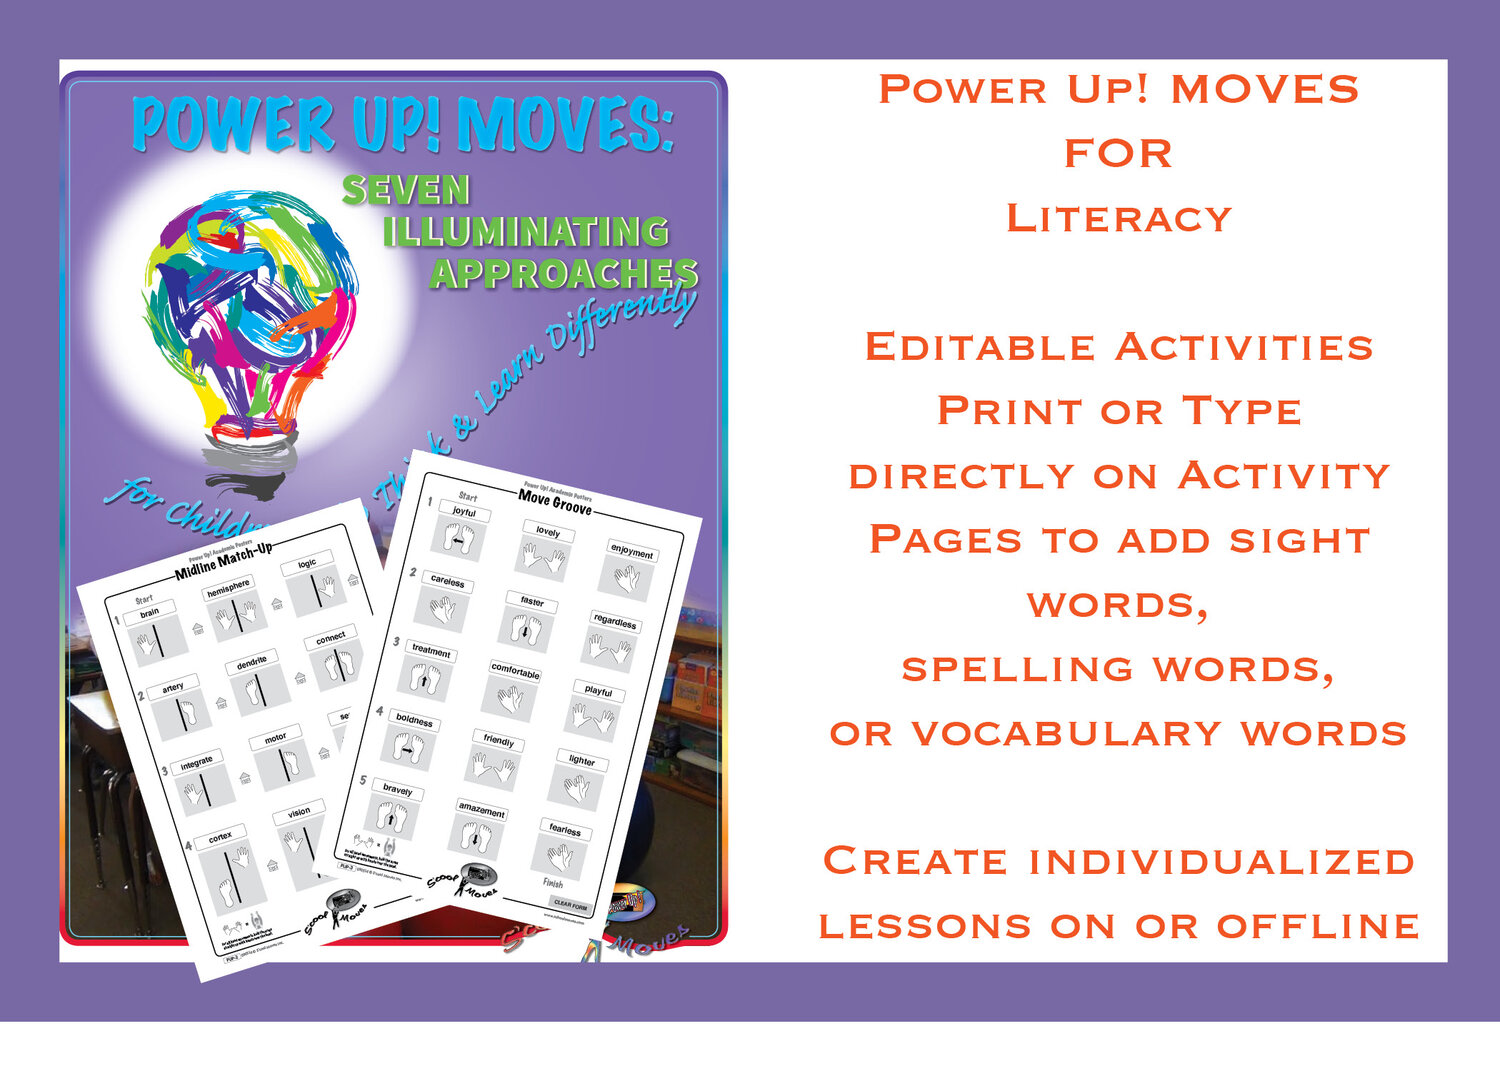 Manual,　Academic　67.5　Grades　for　25　over　—　Moves　Editable　Activities,　Movement-Learning　S'cool　Learning　MB　up,　Activities,　and　Coaching　File